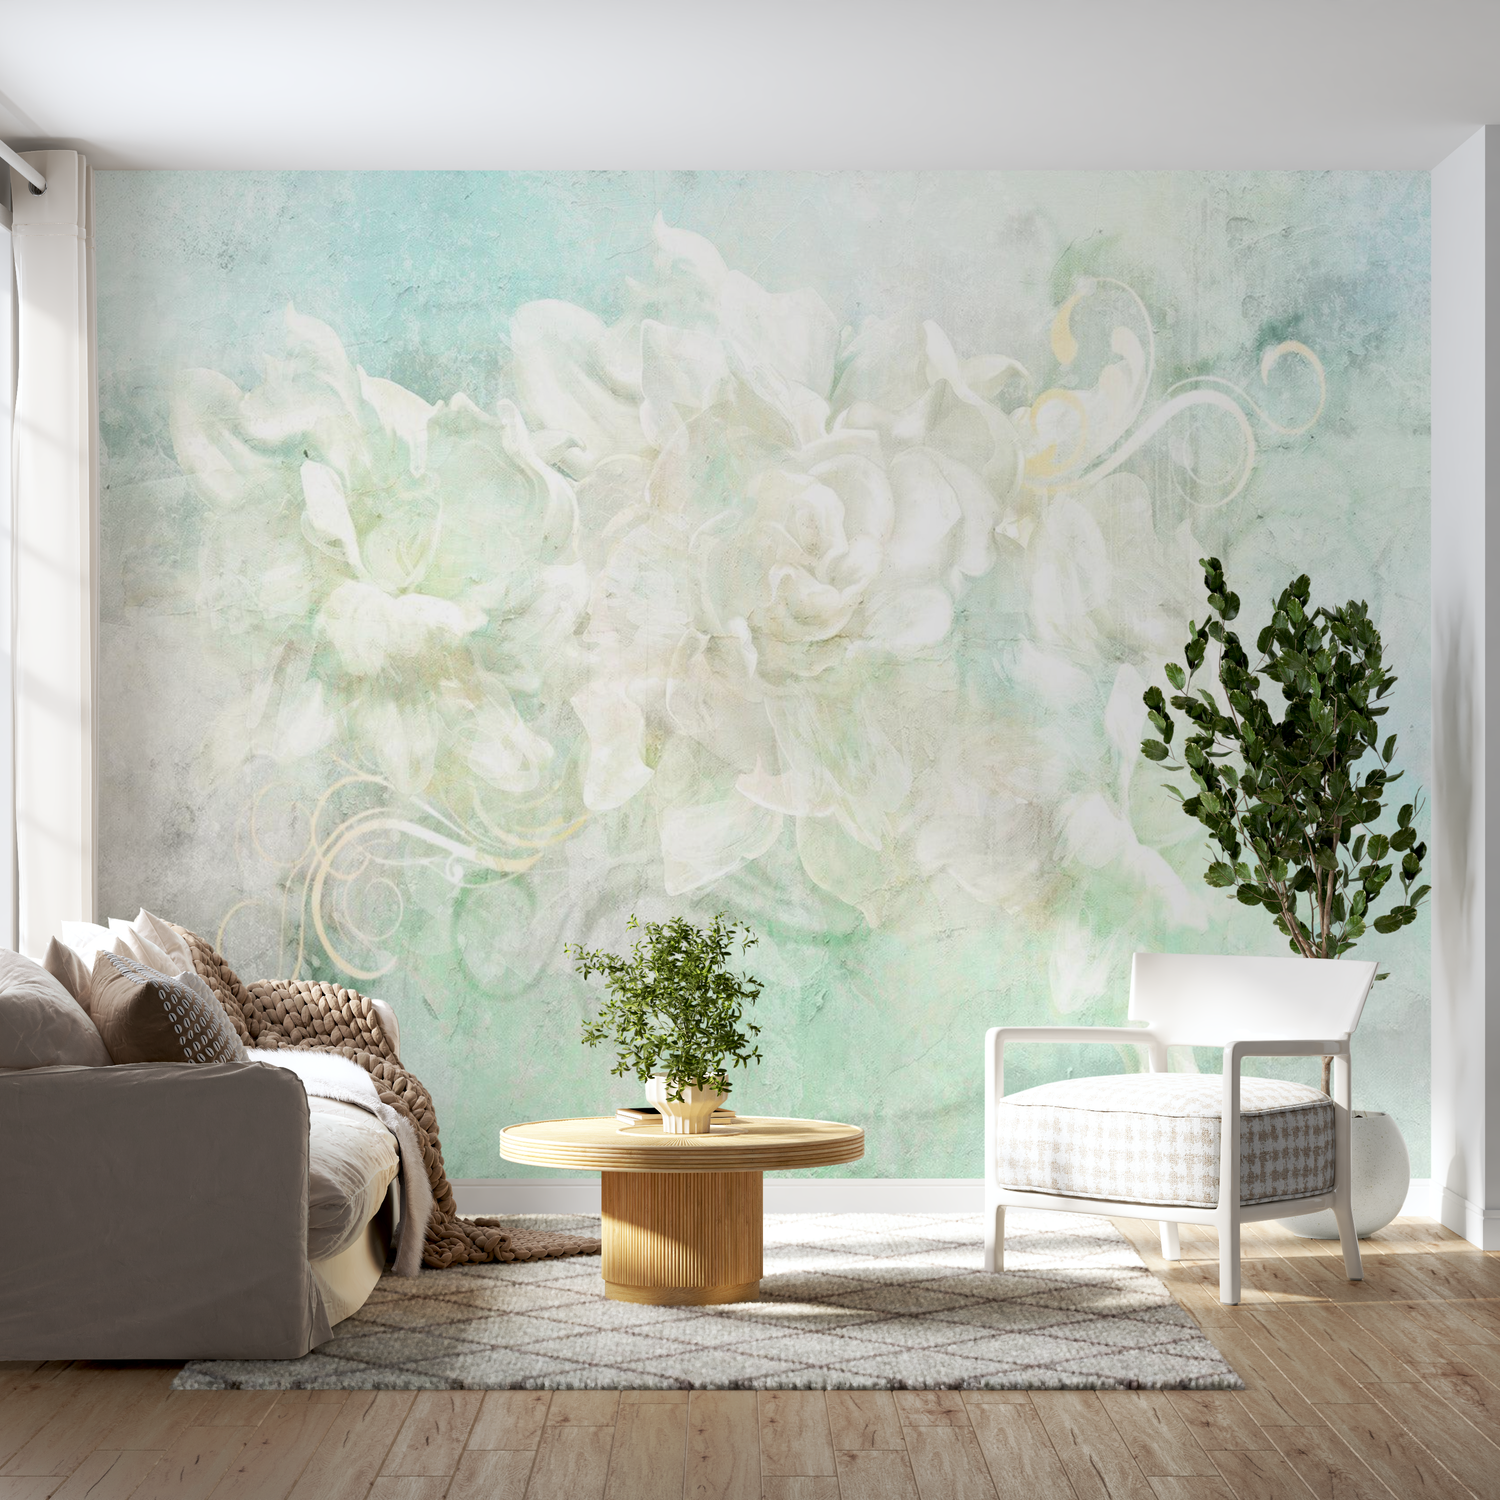 Peel & Stick Floral Wall Mural - Pastel Abstract Flowers - Removable Wallpaper 38"Wx27"H